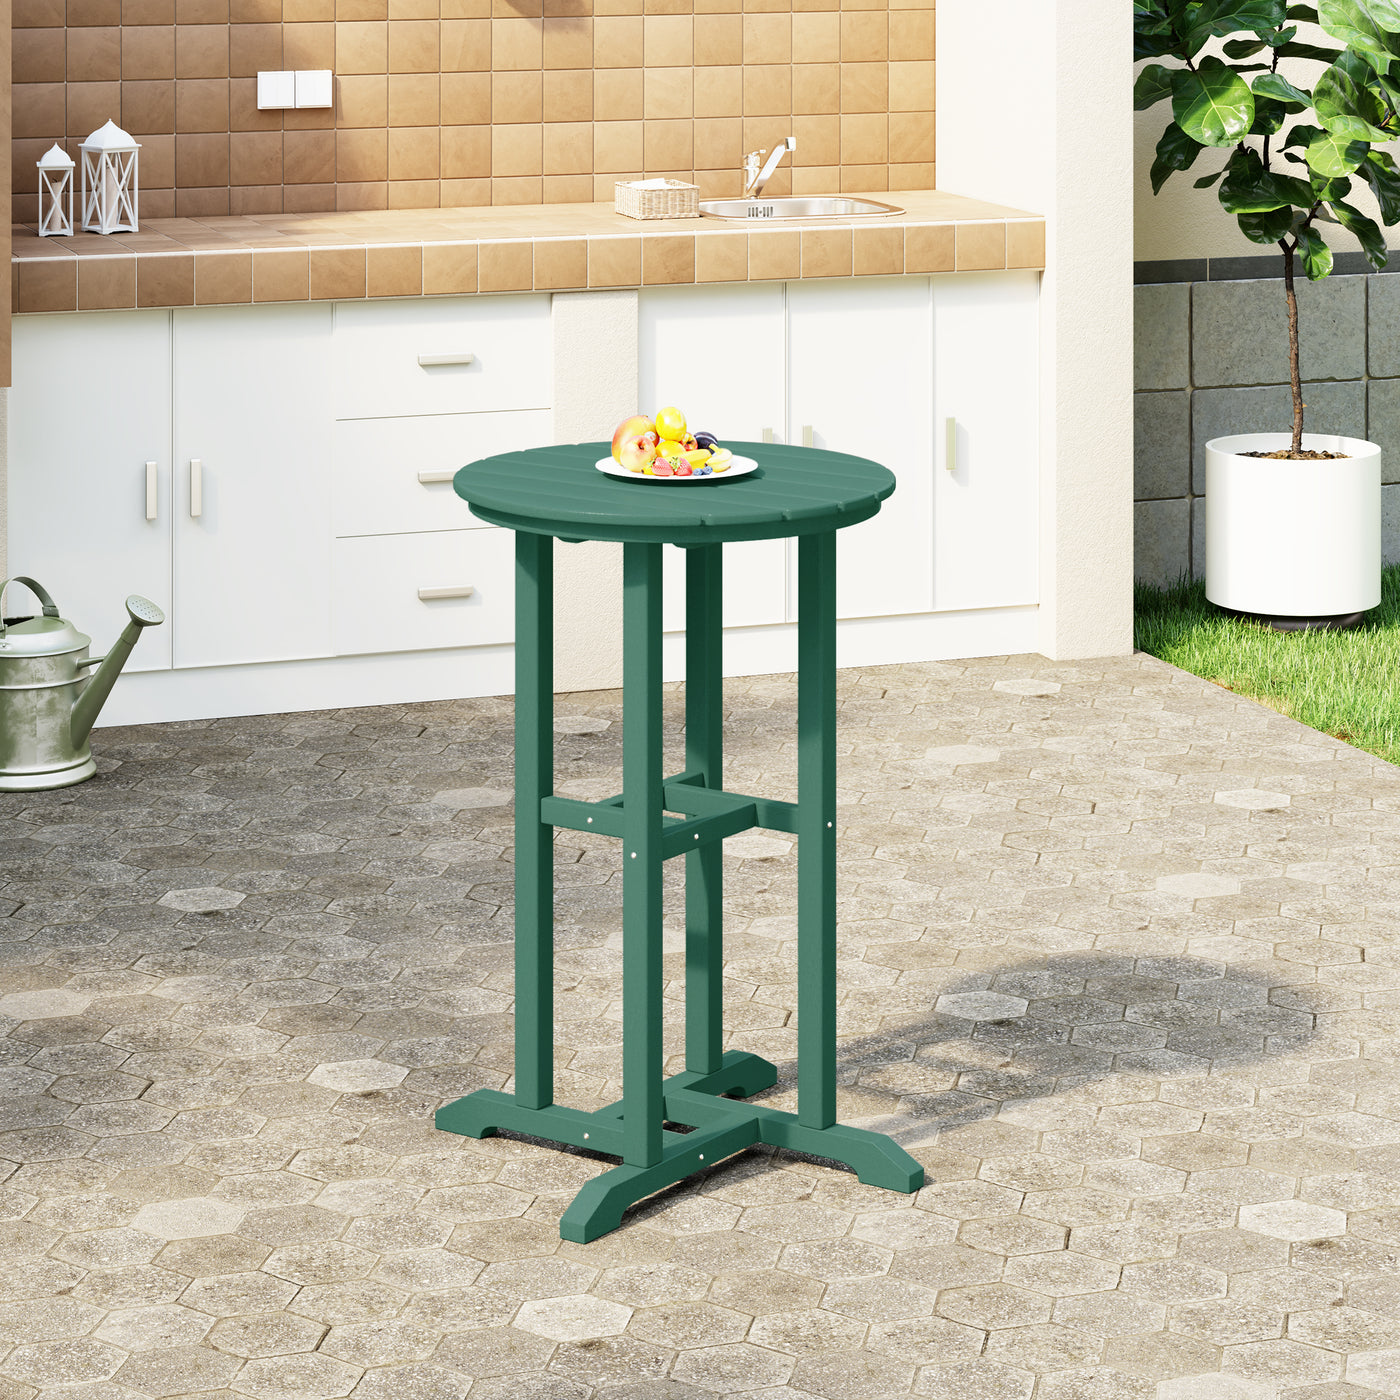 Malibu 37" Counter Height Round Outdoor Patio Bistro Bar Table